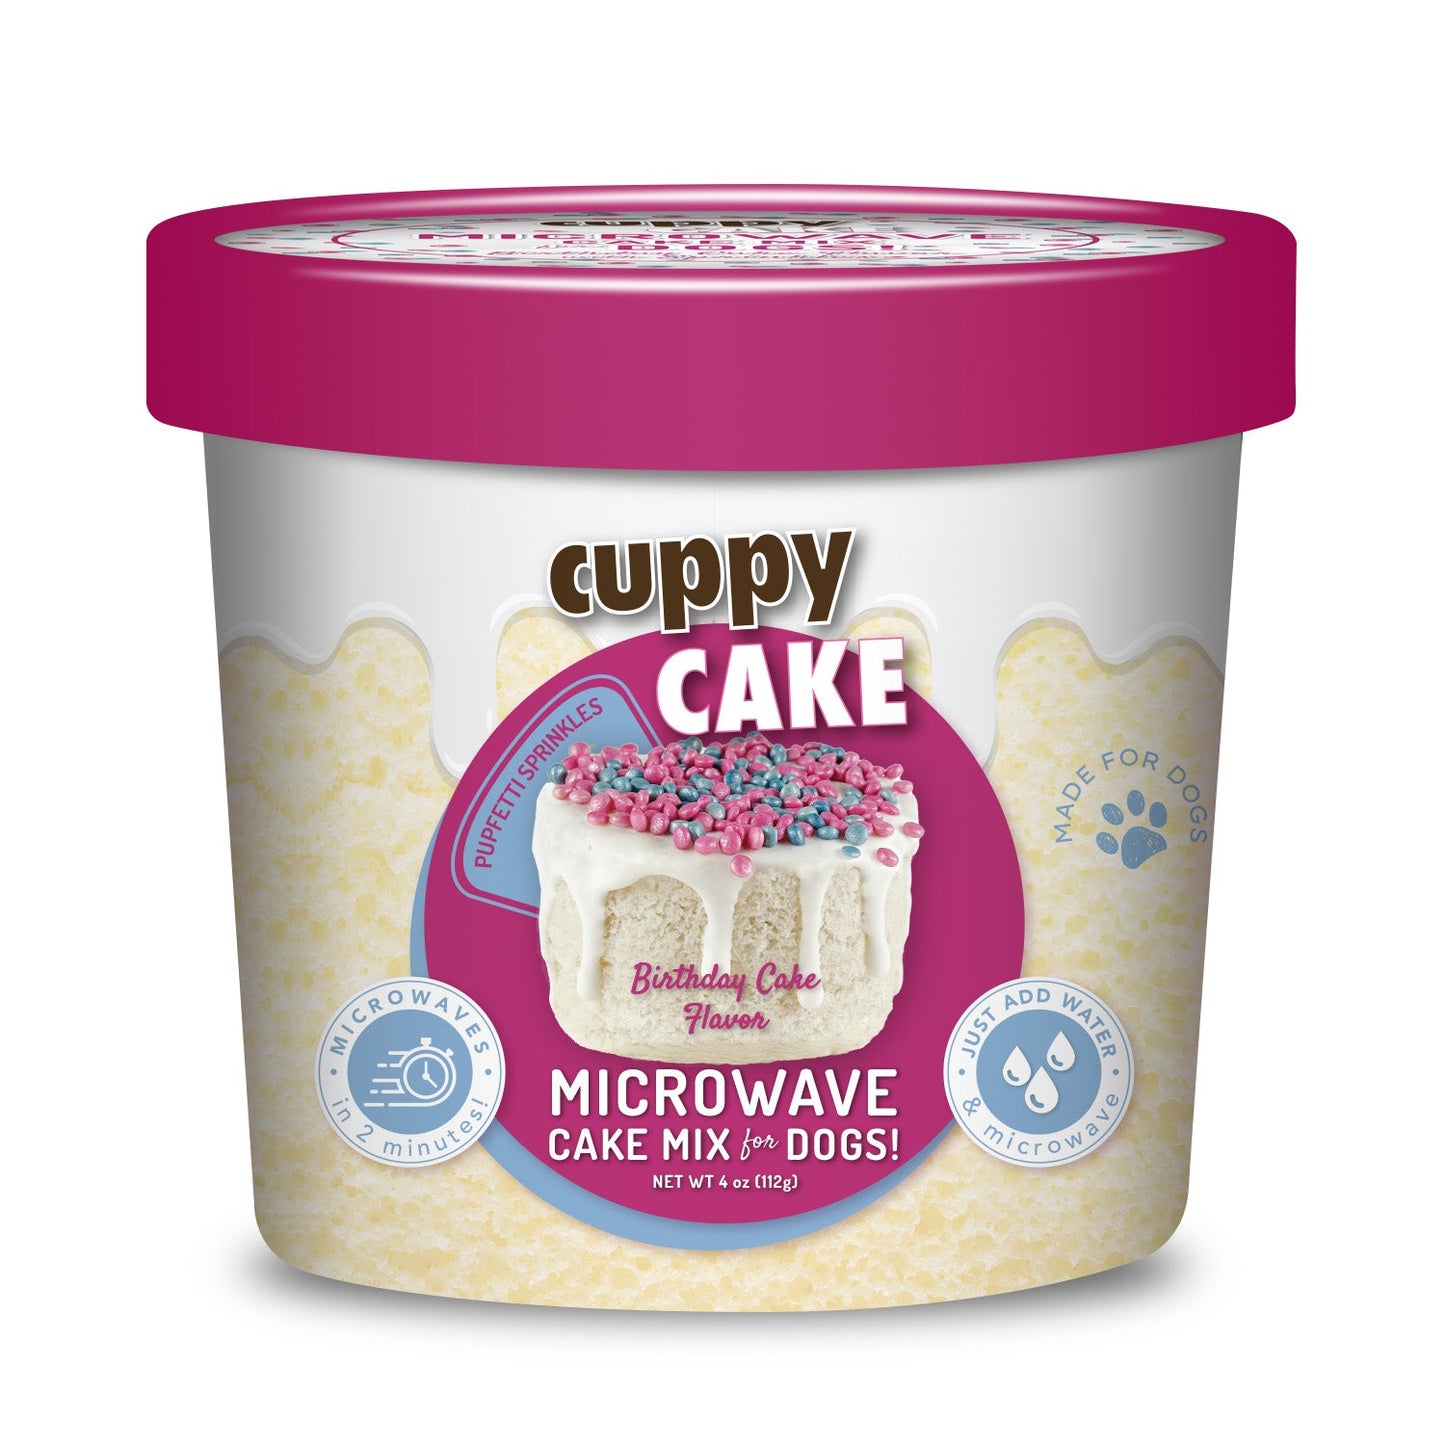 Microwave Cake in A Cup for Dogs - Birthday Cake Flavored with Pupfetti Sprinkles